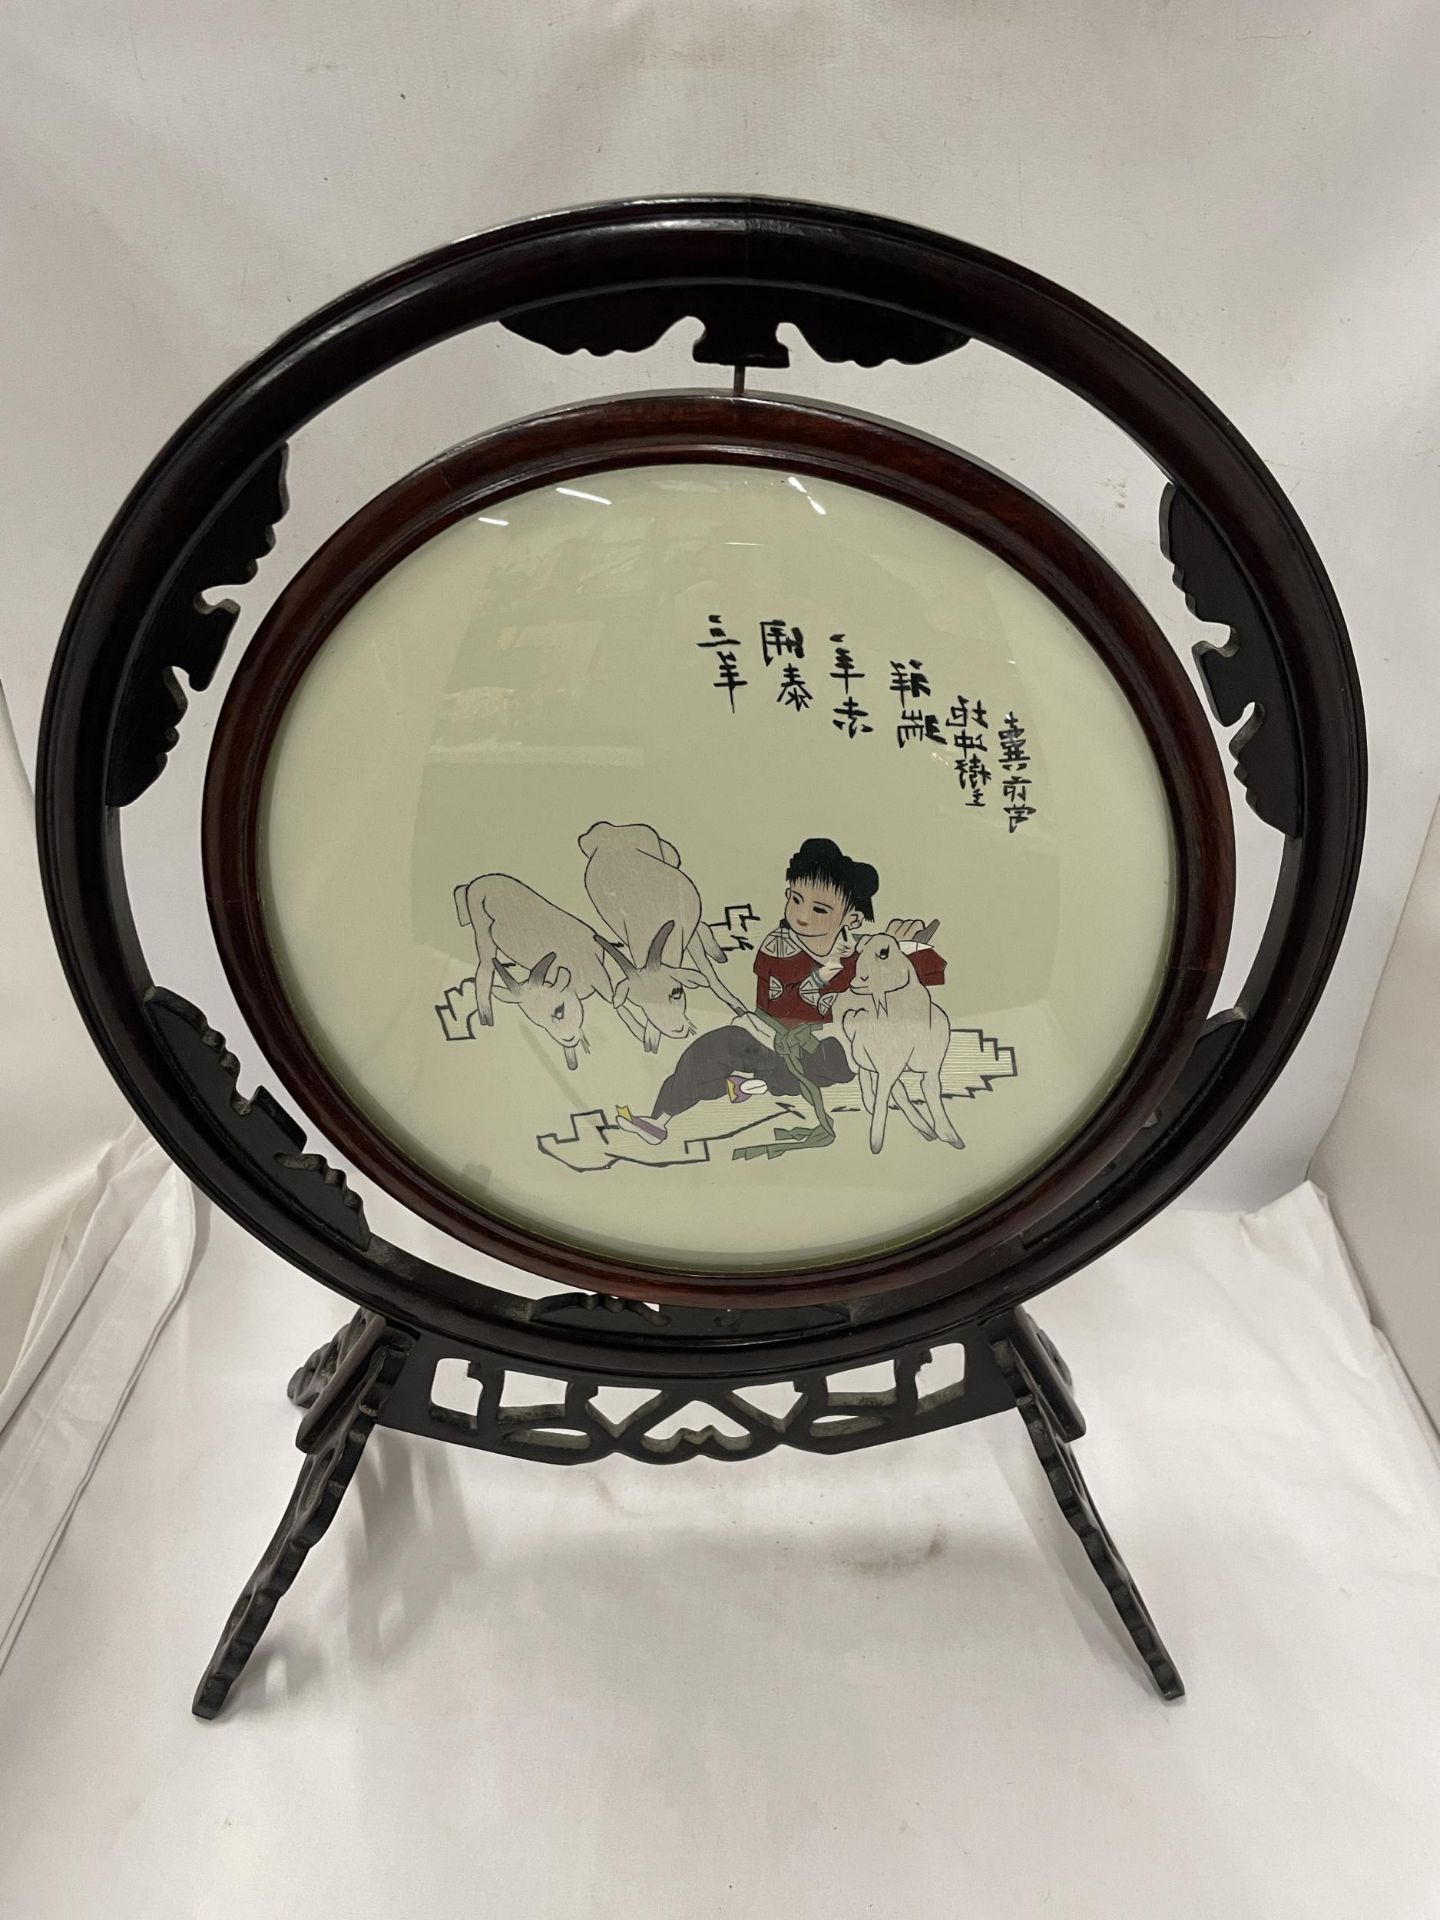 A CHINESE WOODEN FRAMED CIRCULAR PRINT OF A GIRL WITH GOATS - Image 3 of 3